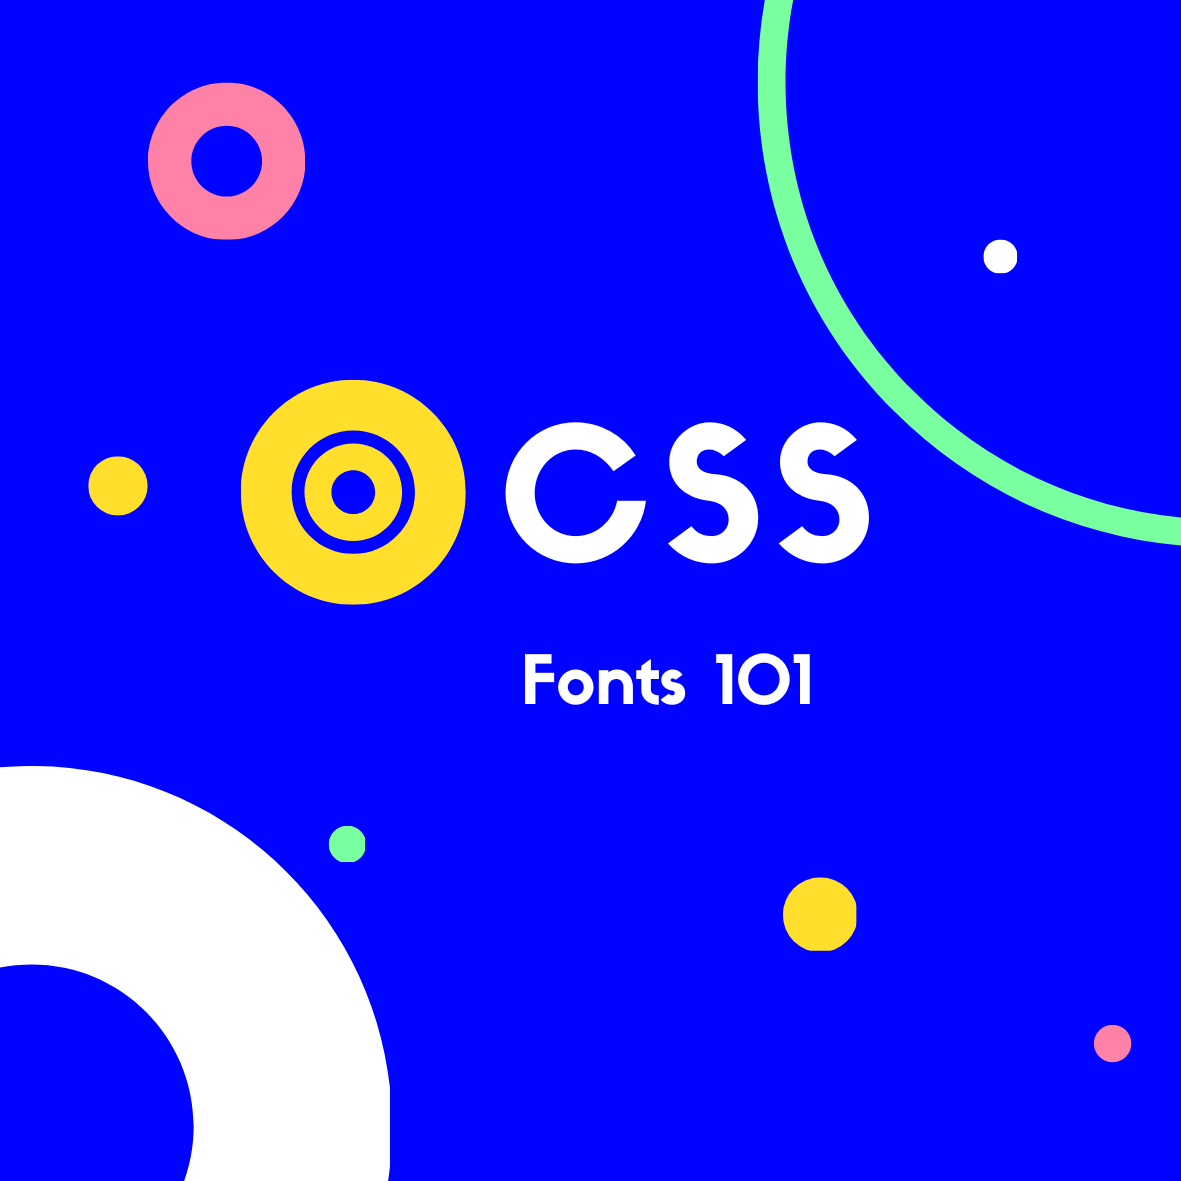 CSS Fonts 101